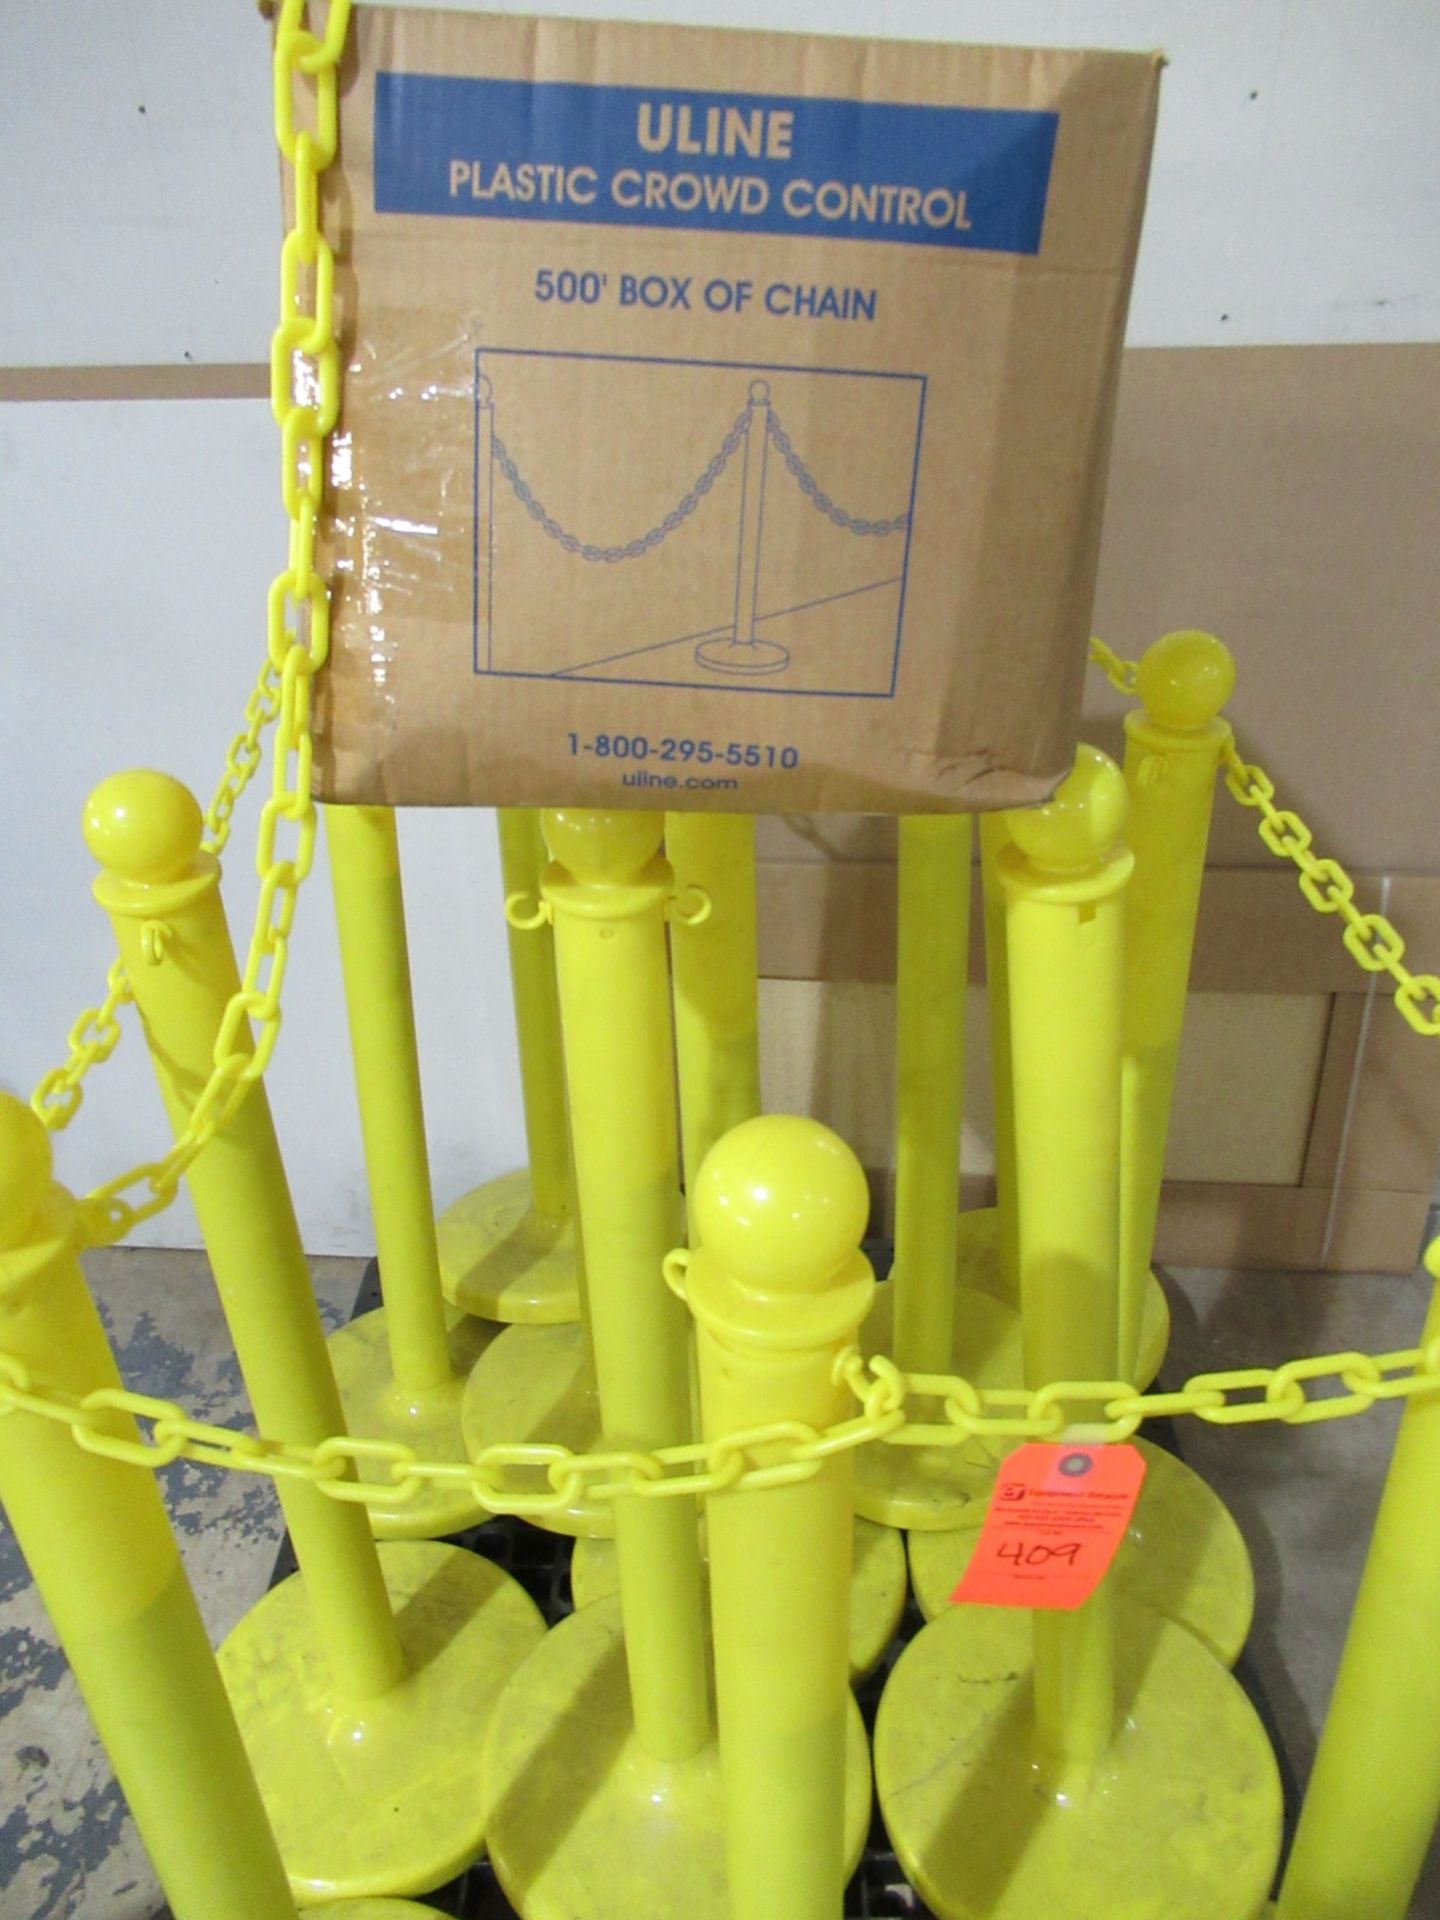 Uline Crowd Control Posts & Chains - Image 2 of 2